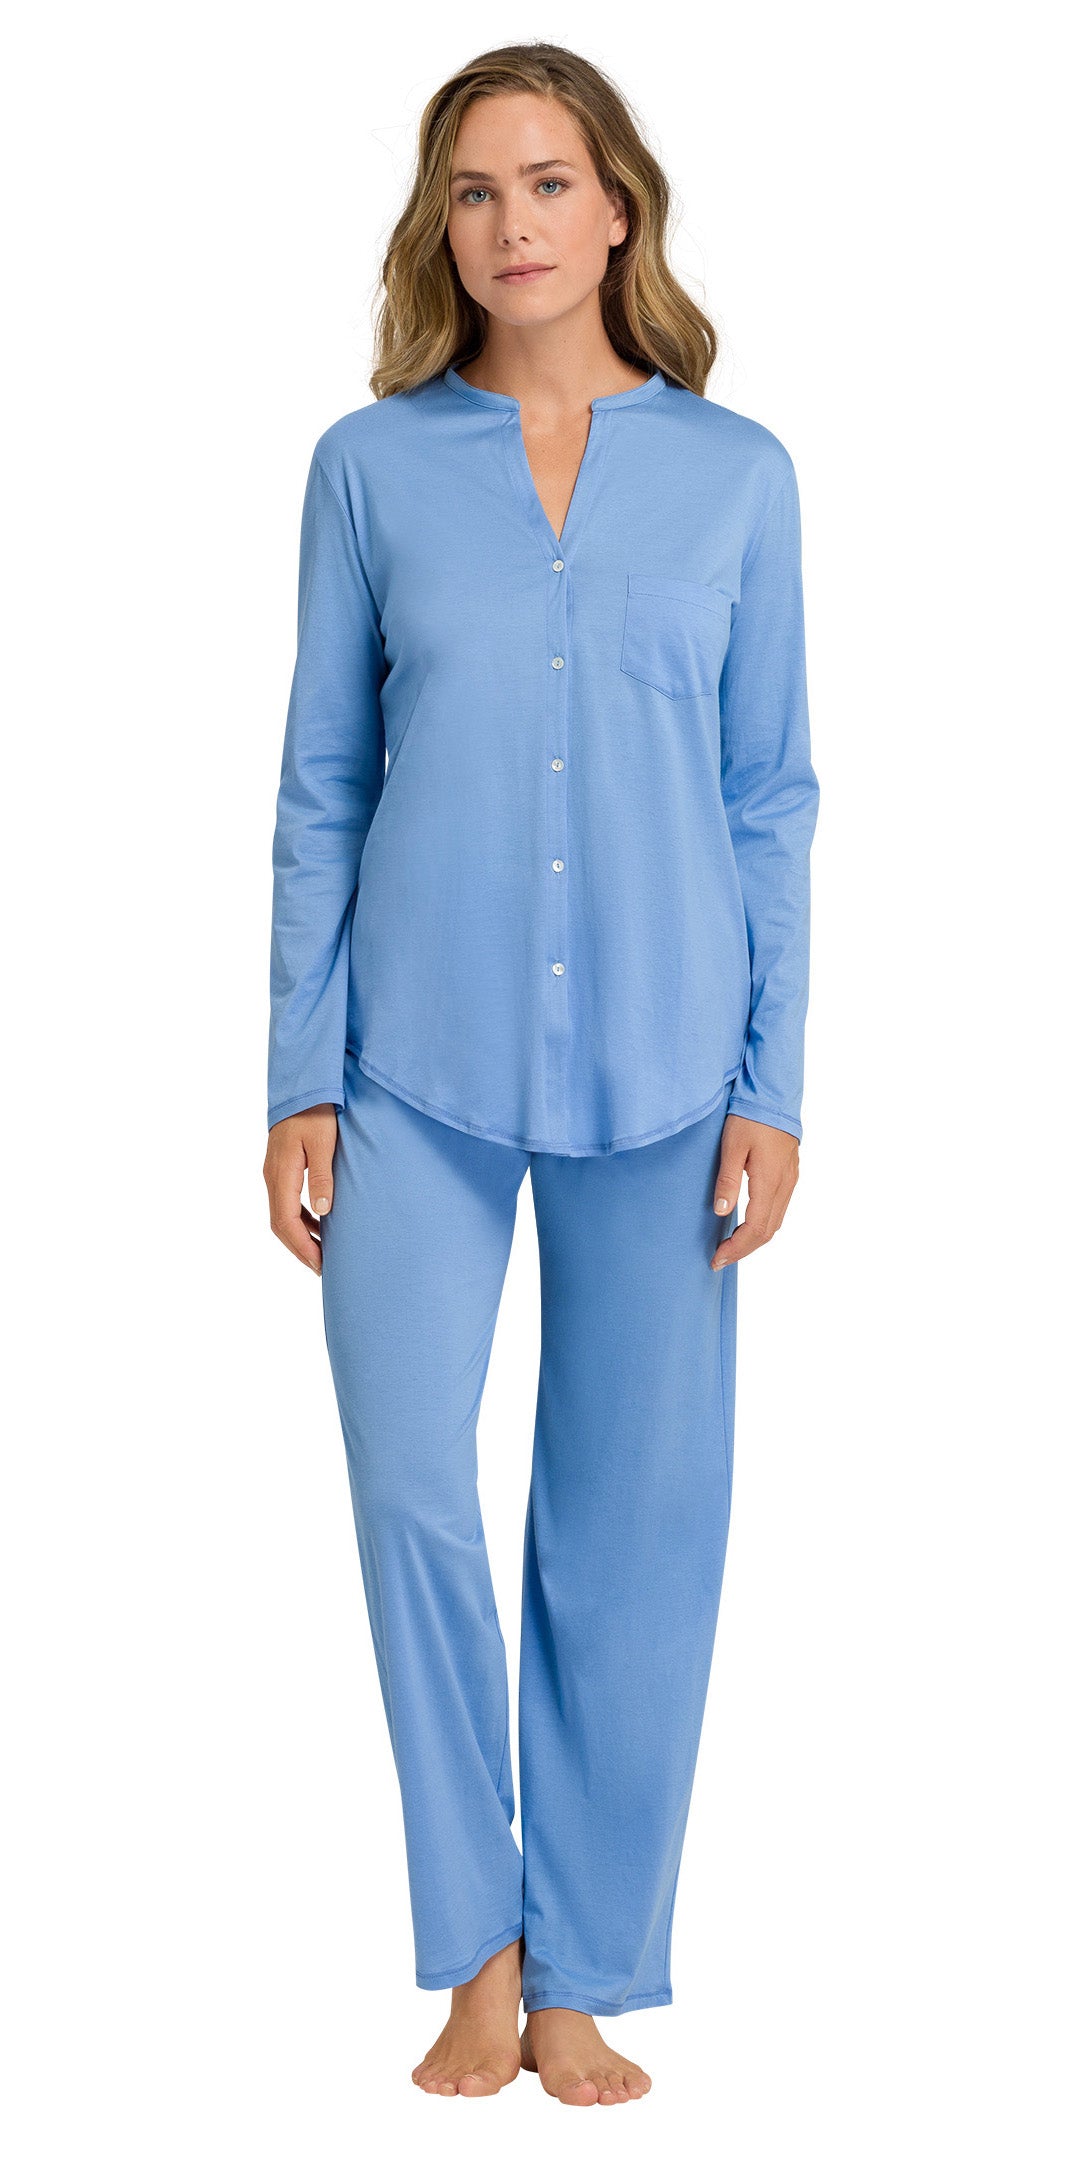 Hanro front Button with chest pocket Blue Pajama